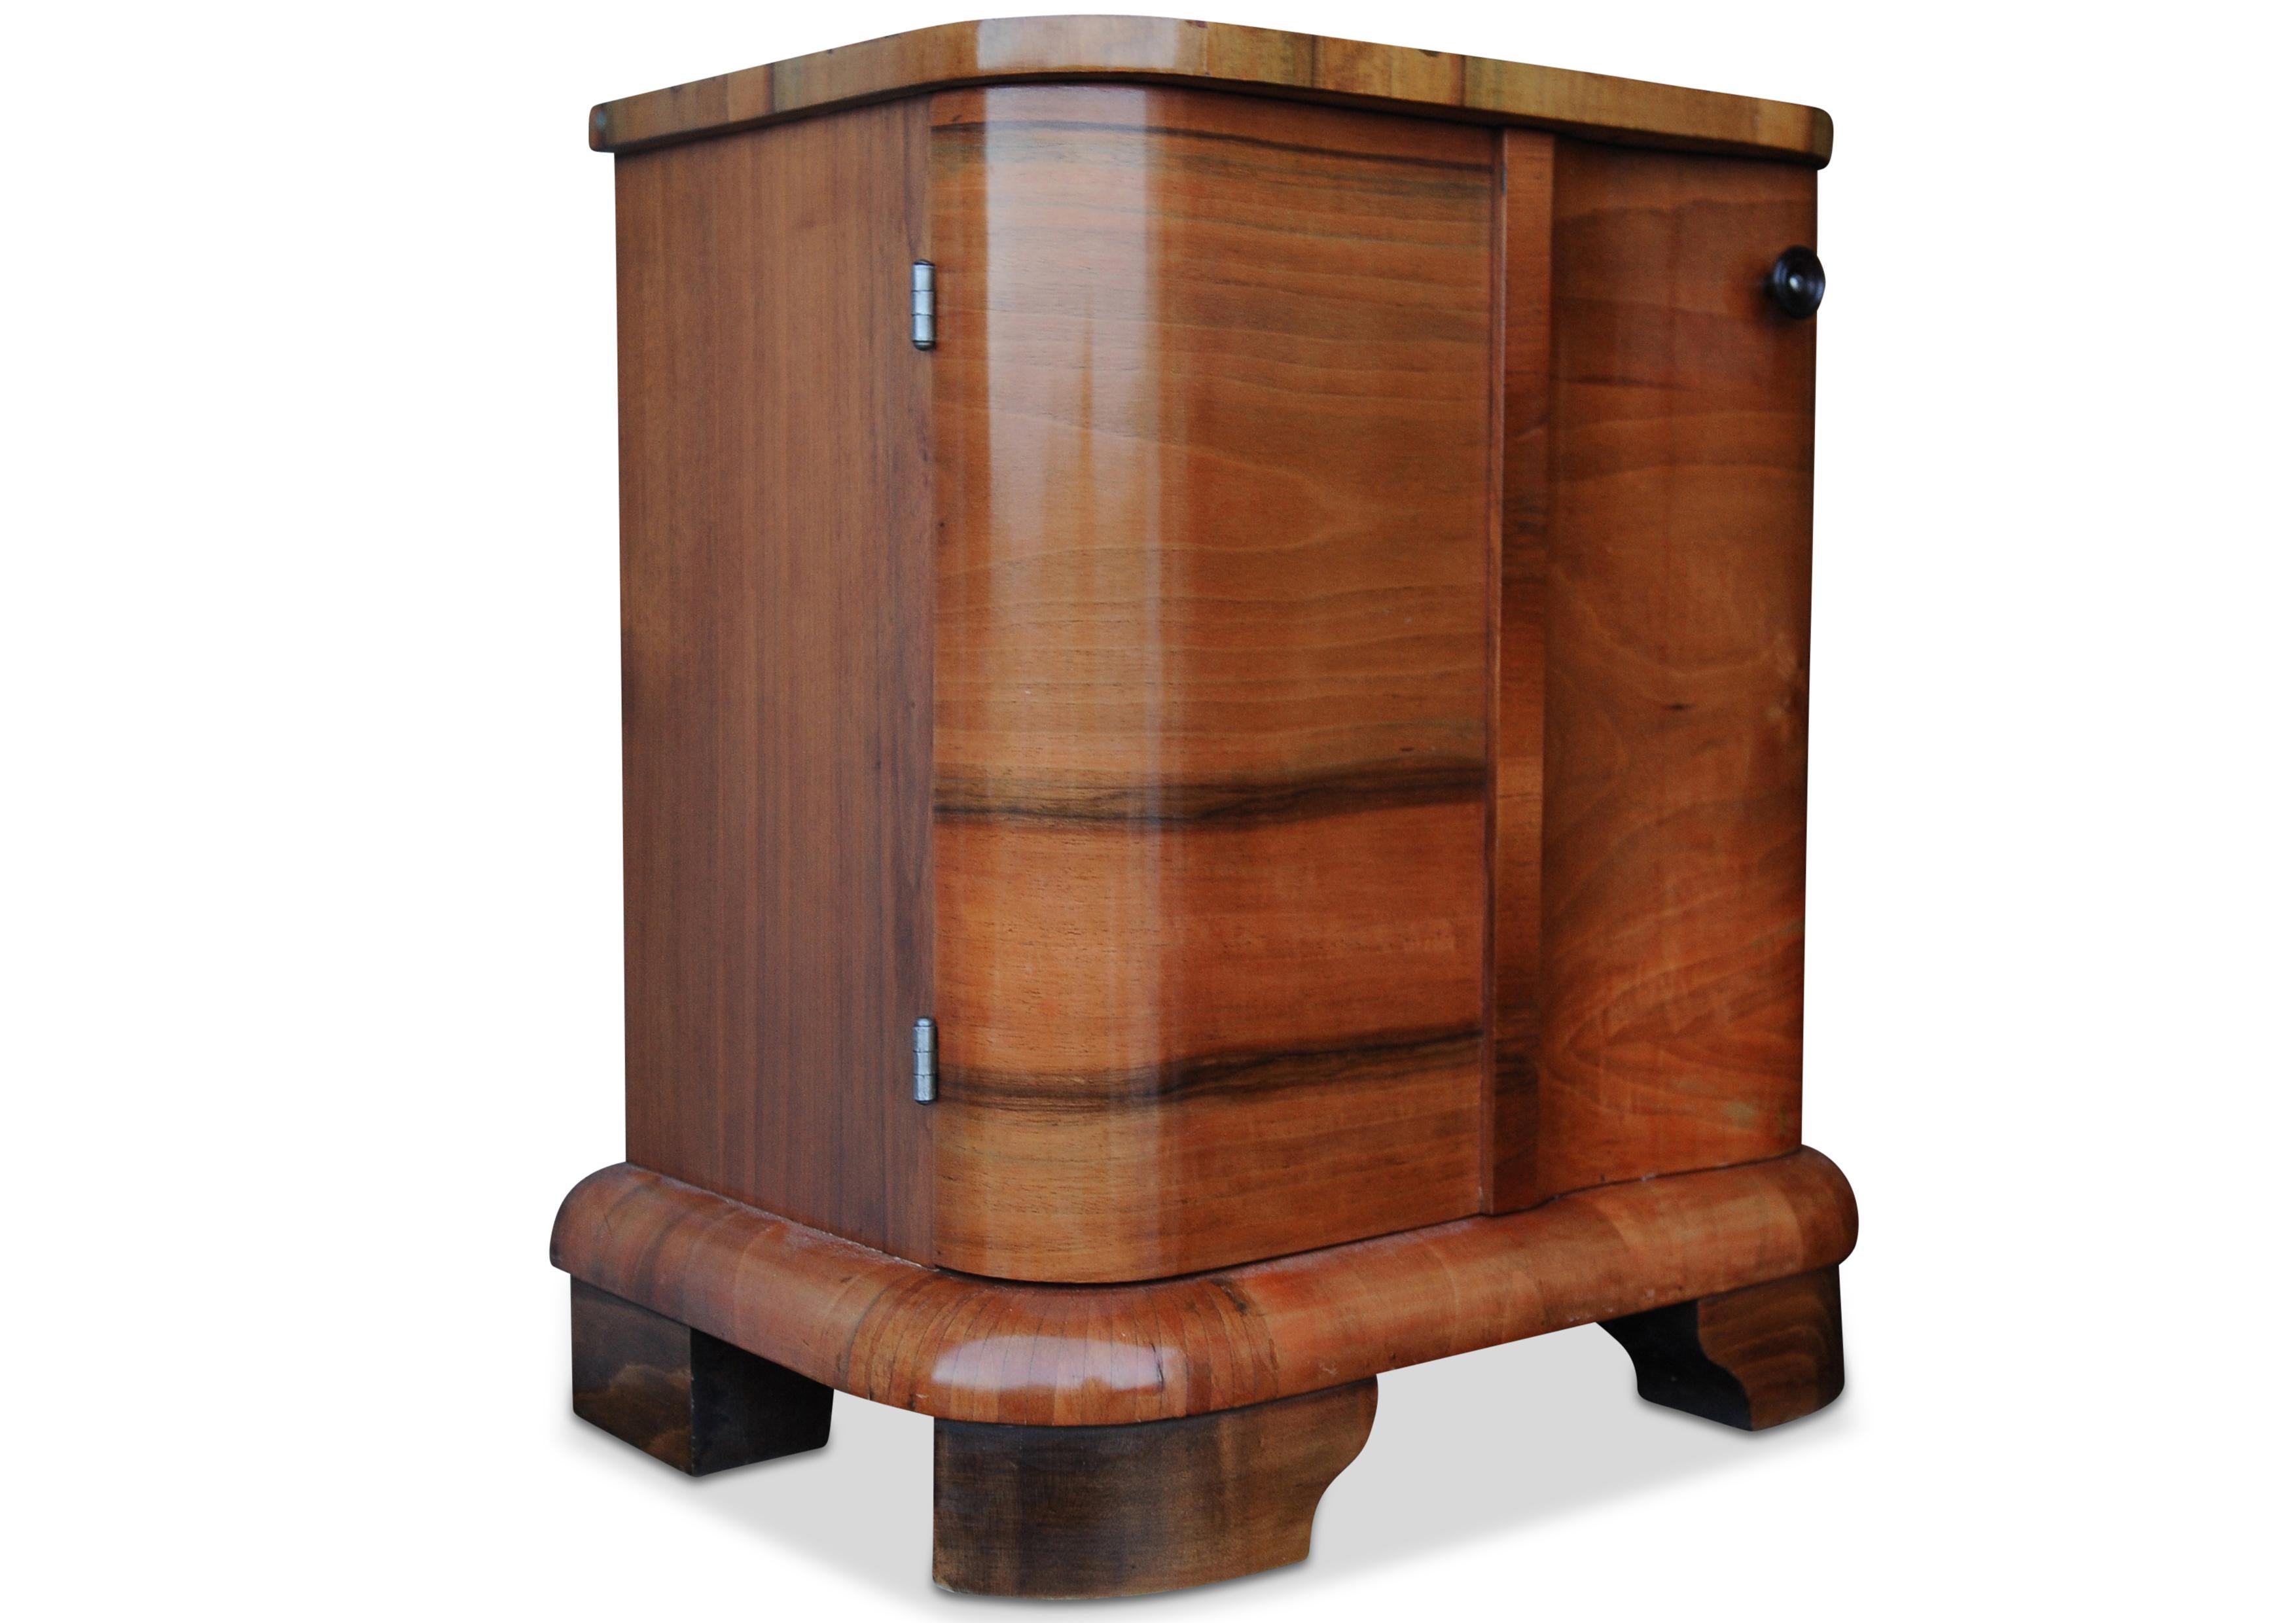 A Pair Of French Art Deco Bedside Cabinets Exquisite Walnut Cloud Shaped Cabinets with Inner Shelf. Designed in the 1920's.

.